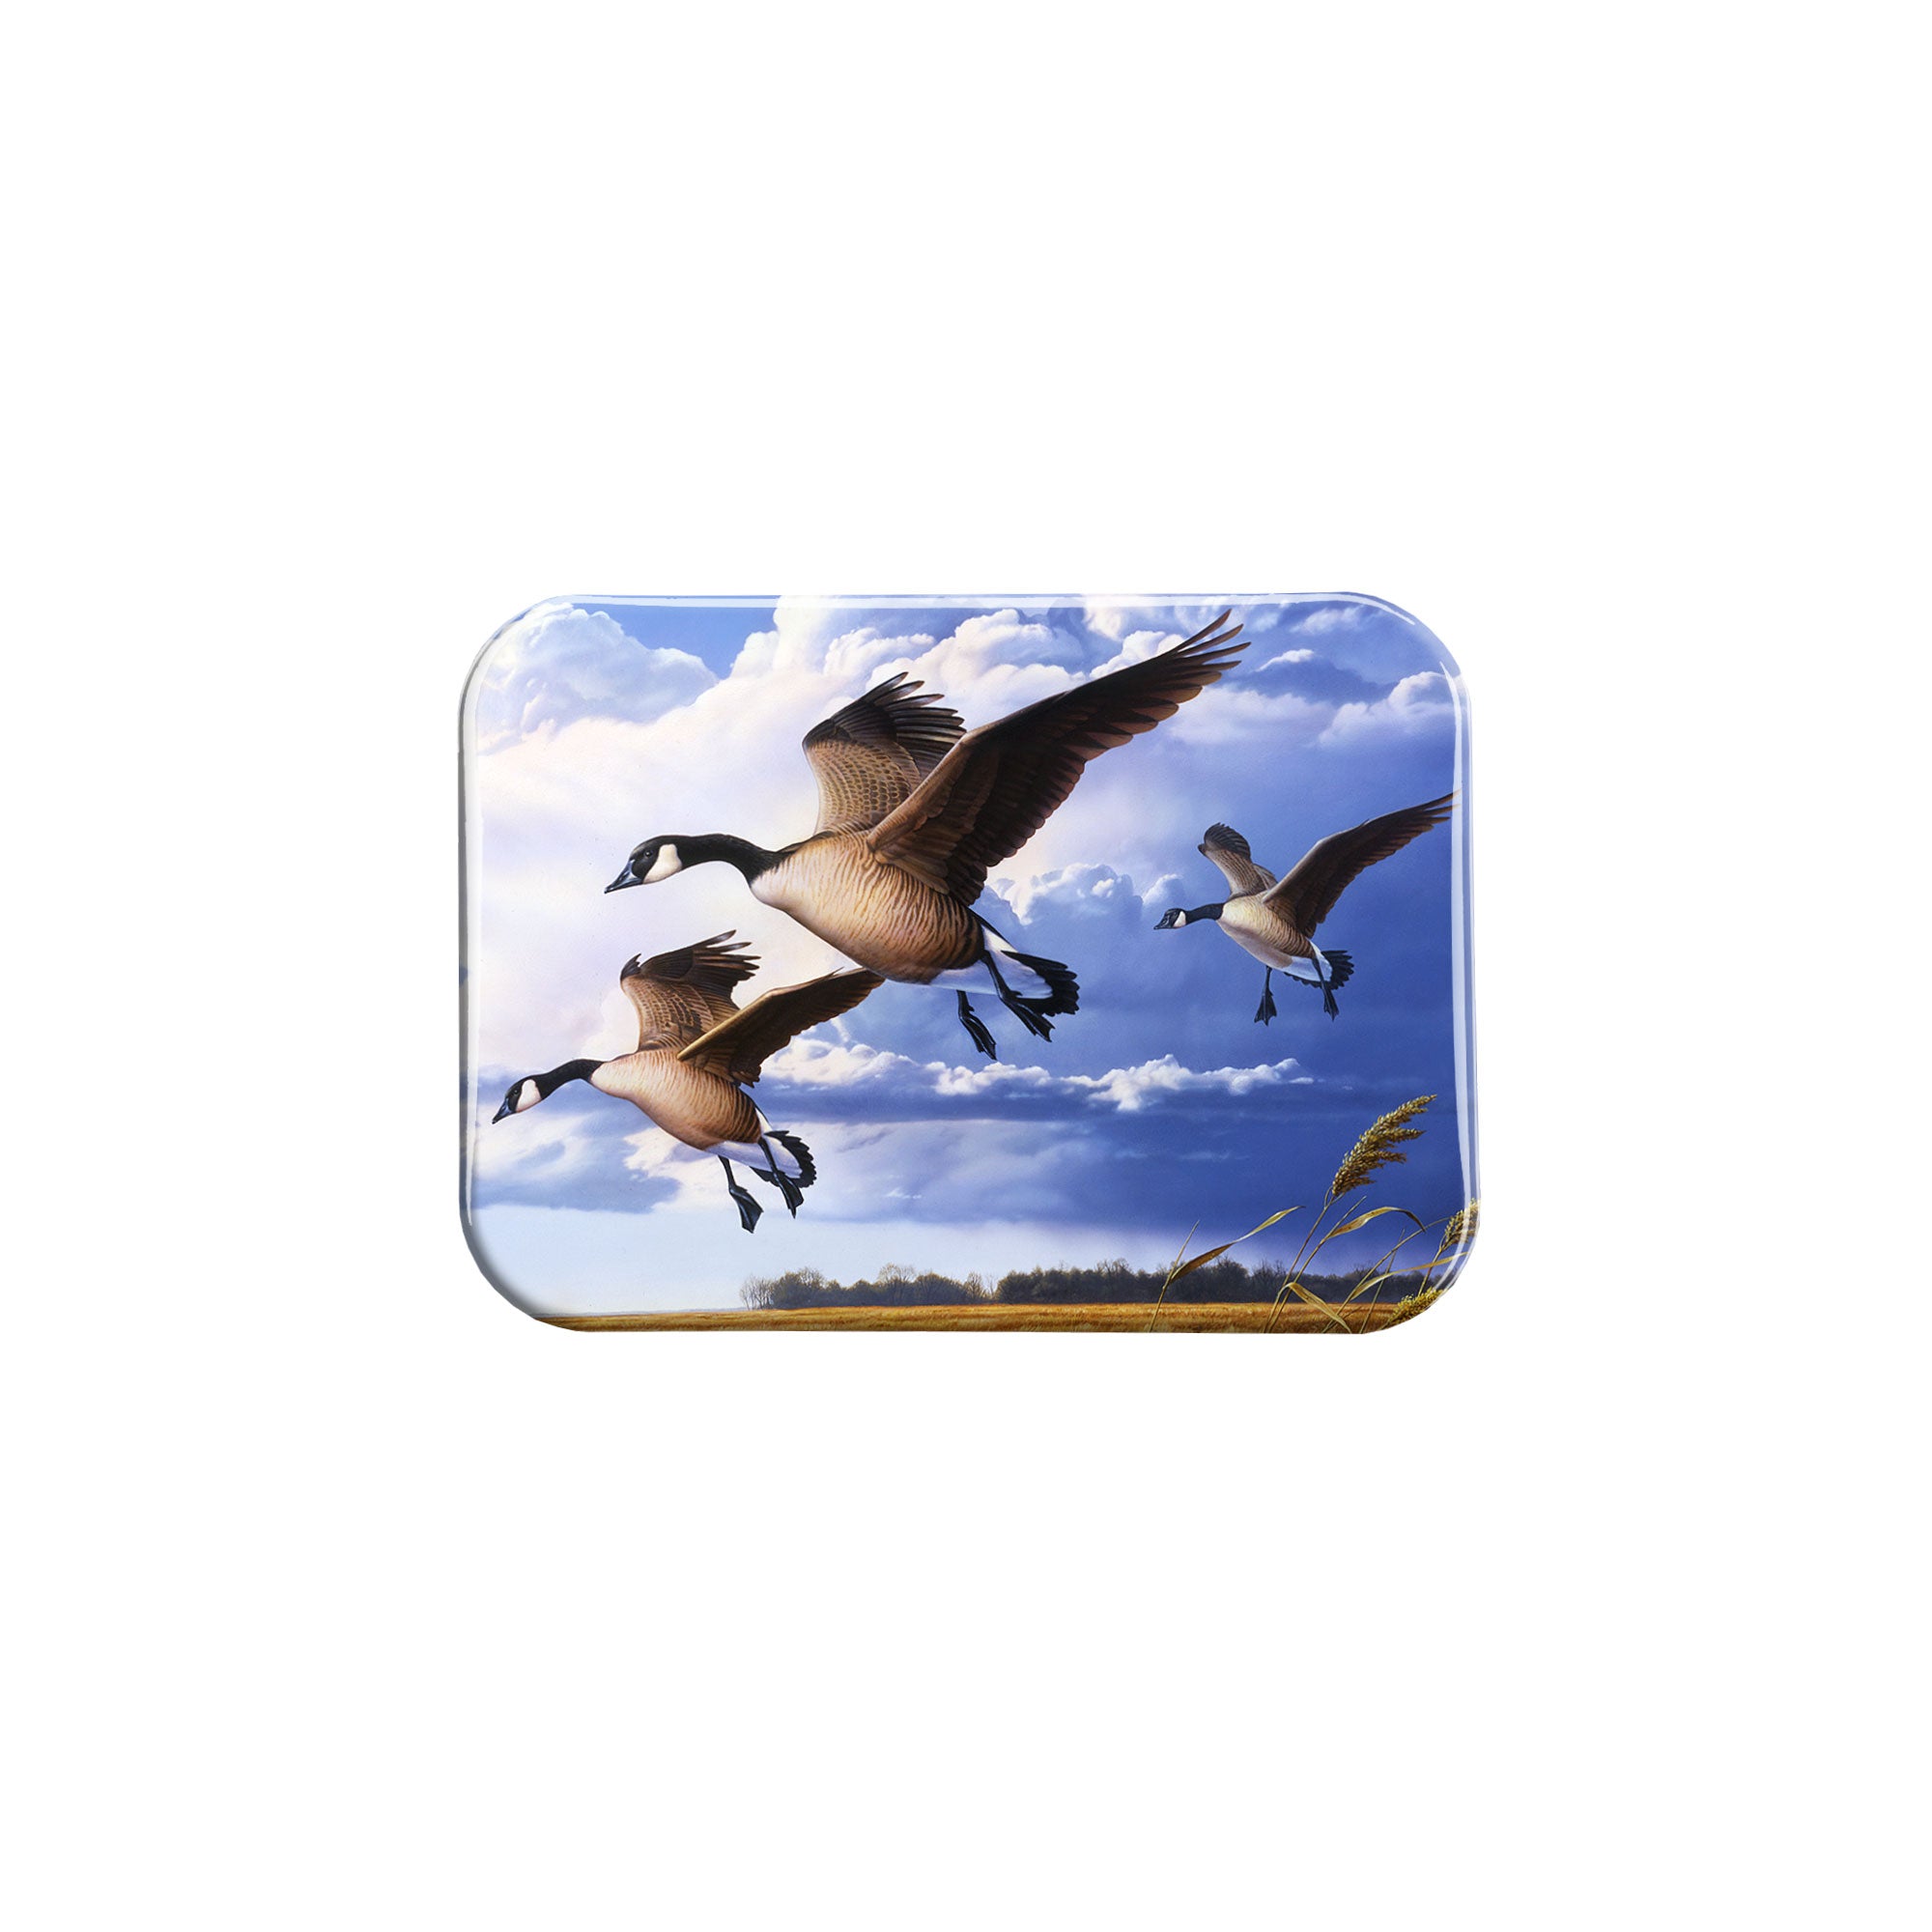 "Geese" - 2.5" X 3.5" Rectangle Fridge Magnets